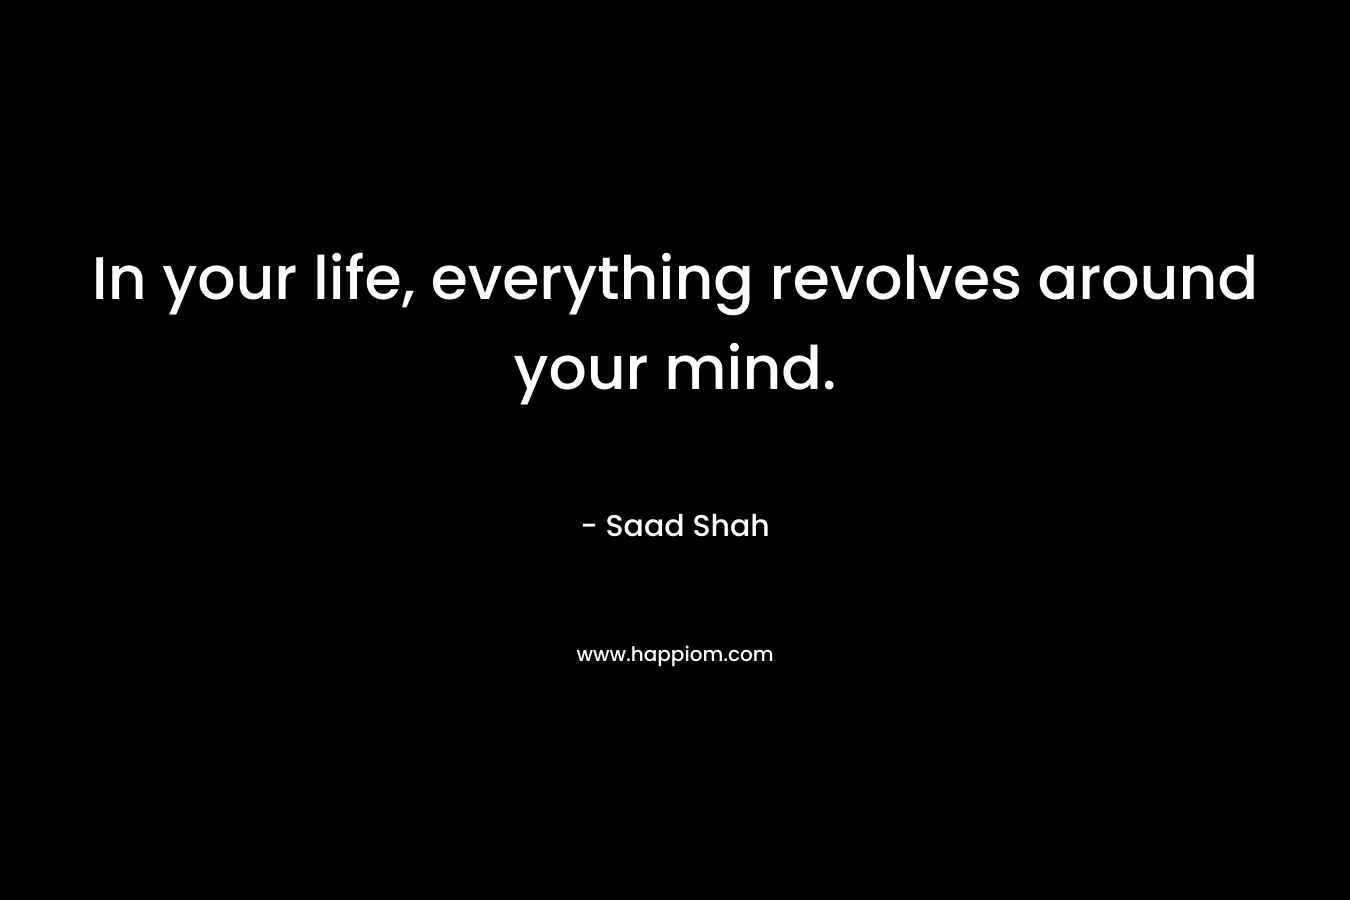 In your life, everything revolves around your mind. – Saad Shah